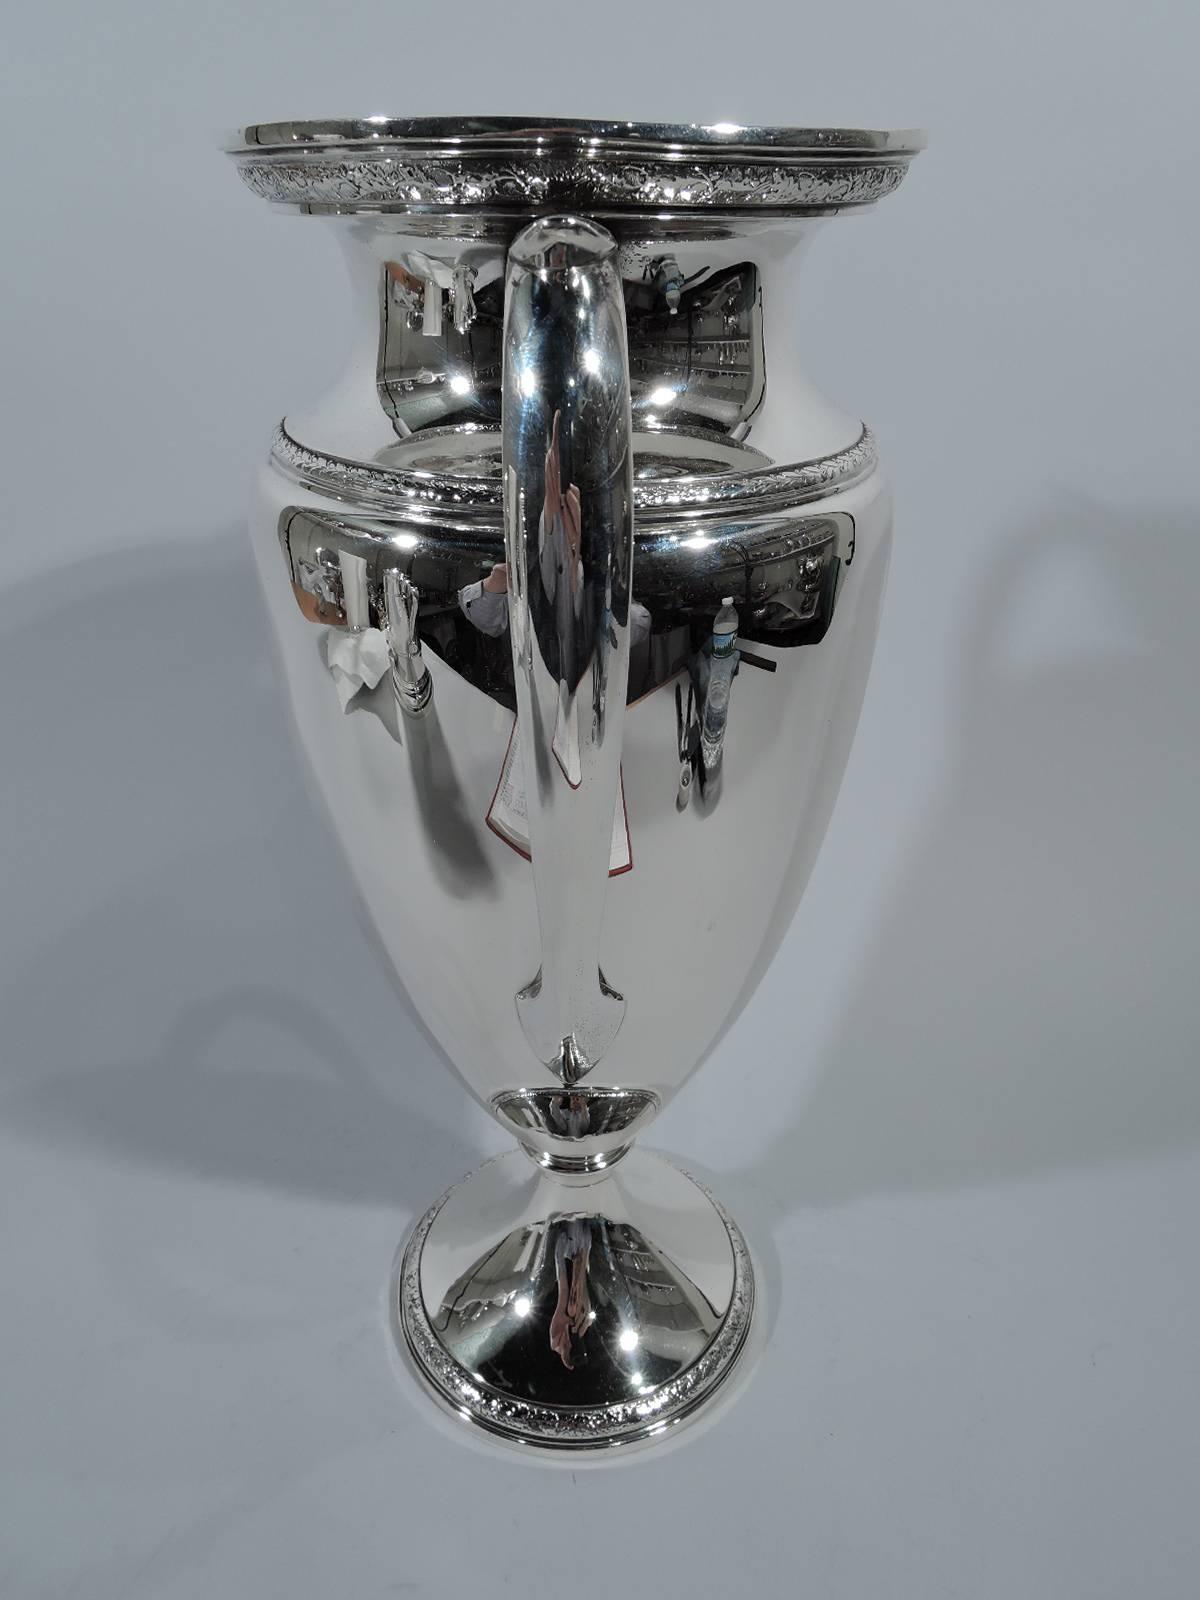 Tall sterling silver trophy cup. Made by Gorham in Providence in 1930. Amphora with capped side handles and raised foot. Bands of leaf ornament on rim, shoulder, and foot. Hallmark includes date symbol and no. A12843. Weight: 26.4 troy ounces.